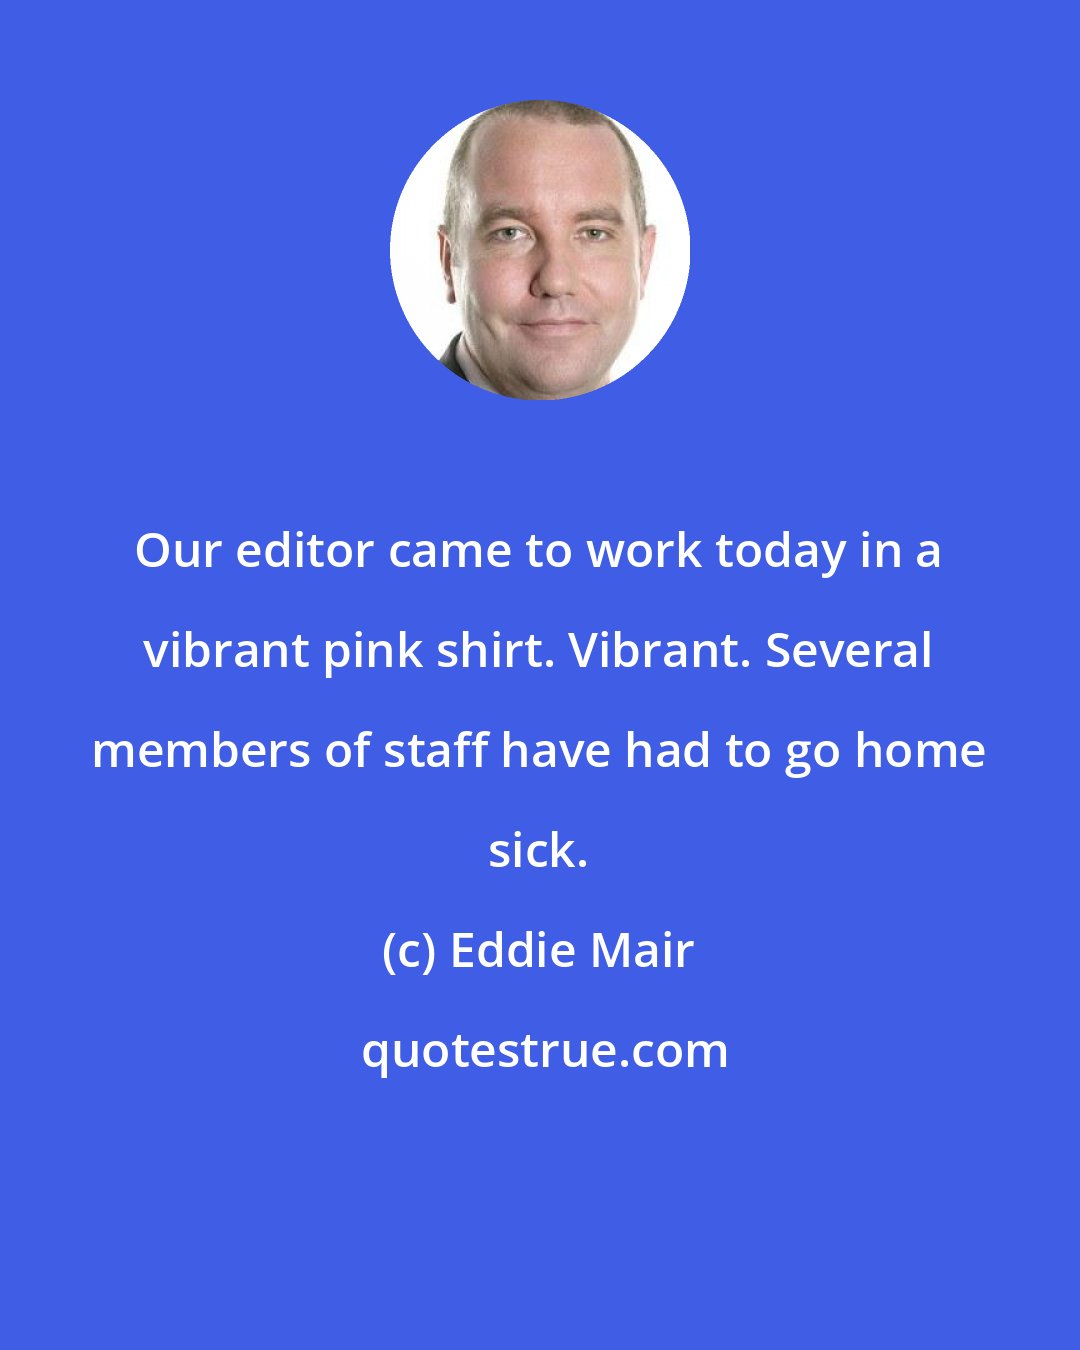 Eddie Mair: Our editor came to work today in a vibrant pink shirt. Vibrant. Several members of staff have had to go home sick.